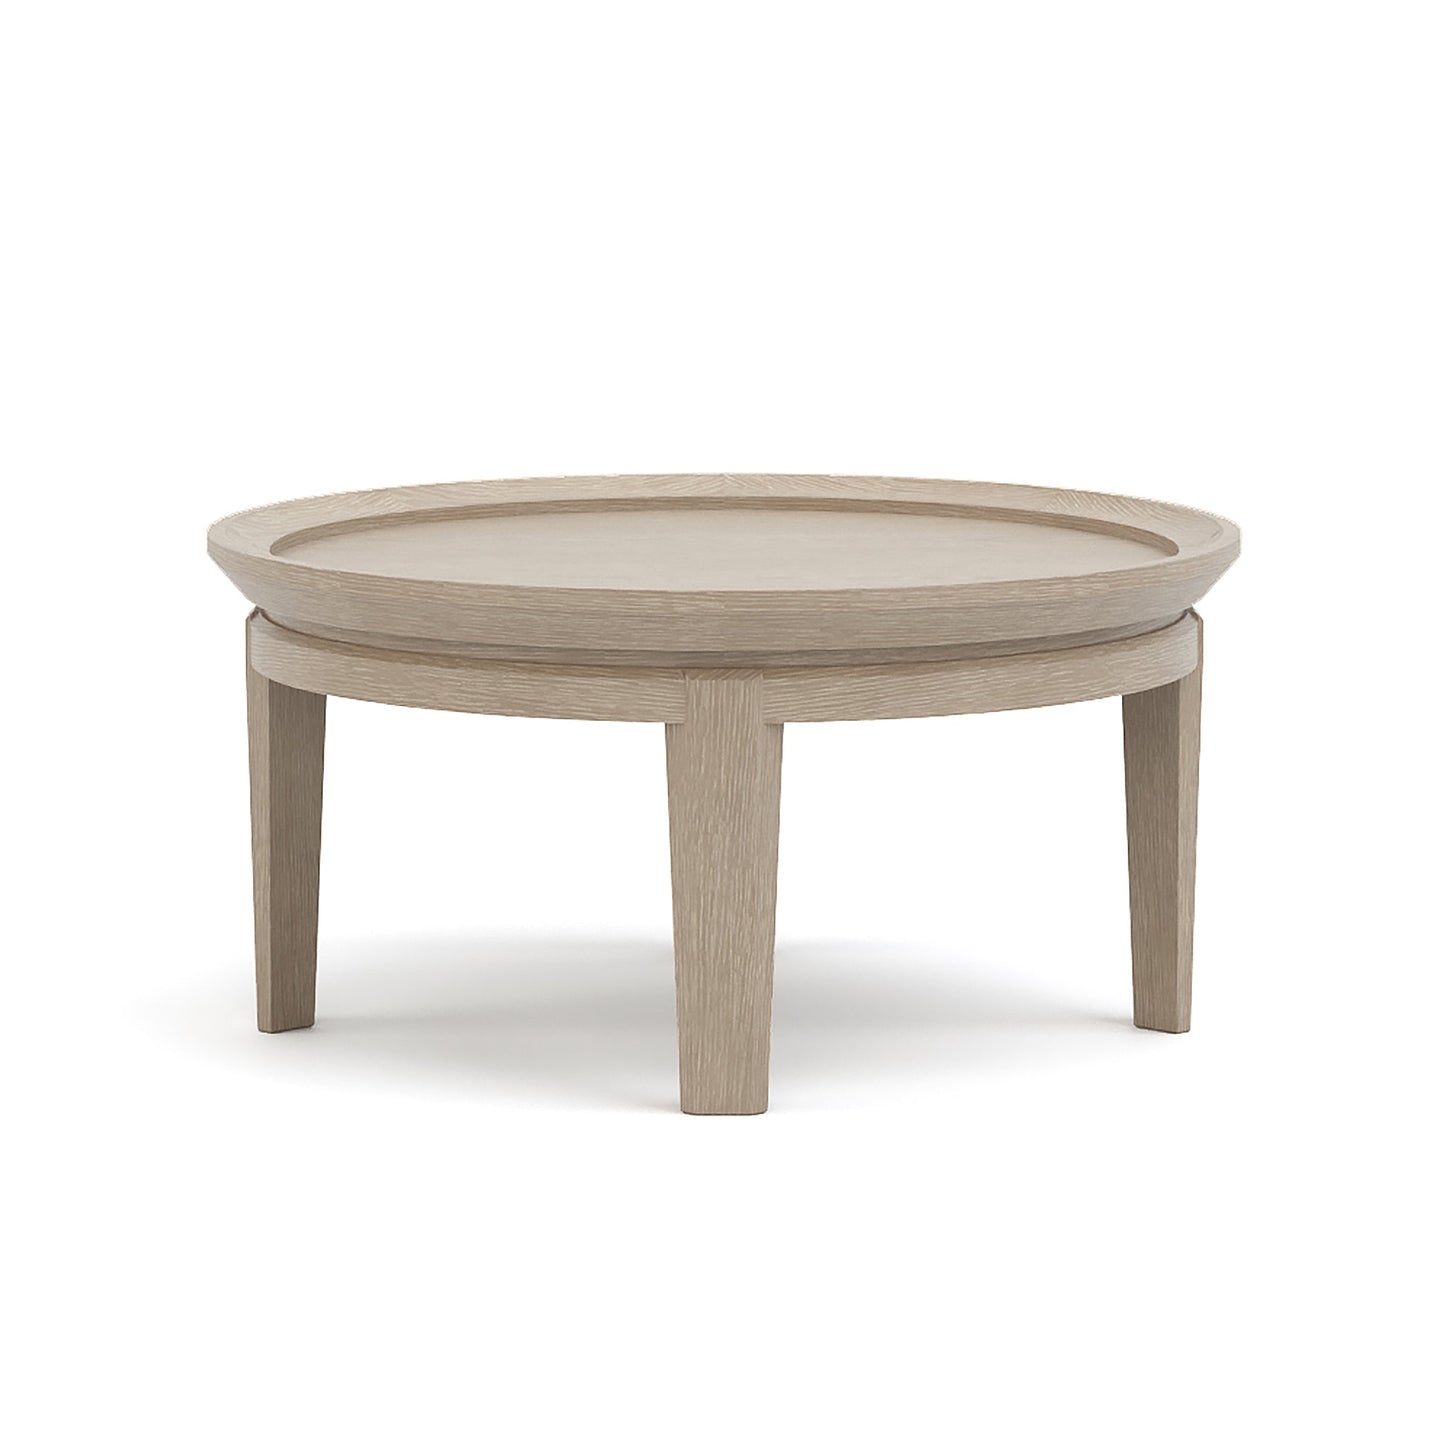 Maidstone 28-inch Round Cocktail Table in 201 Sandbank finish